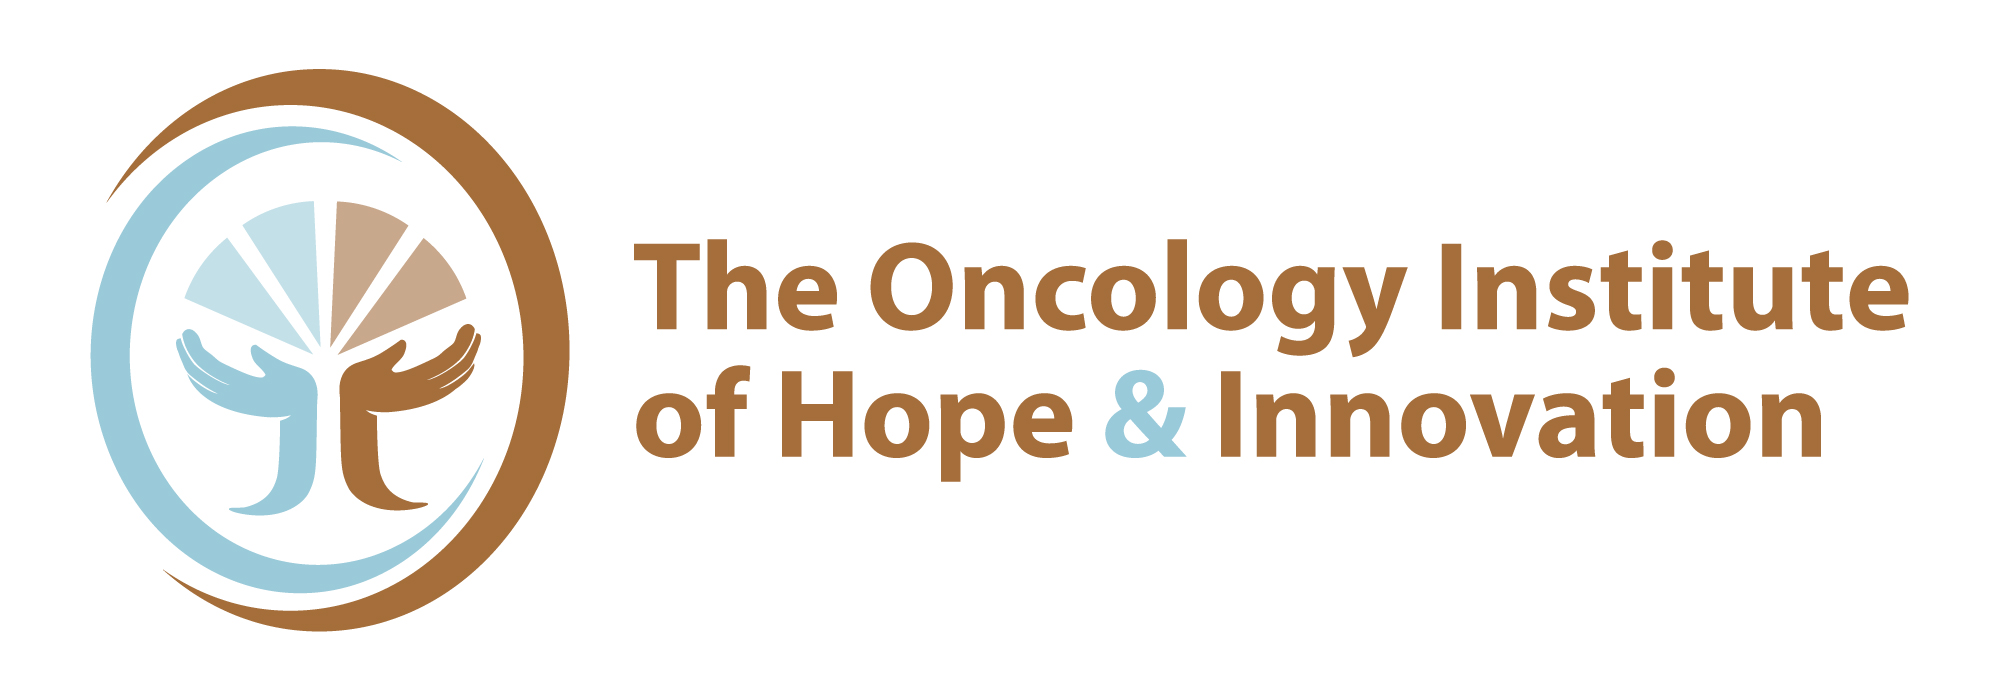 The oncology institute logo